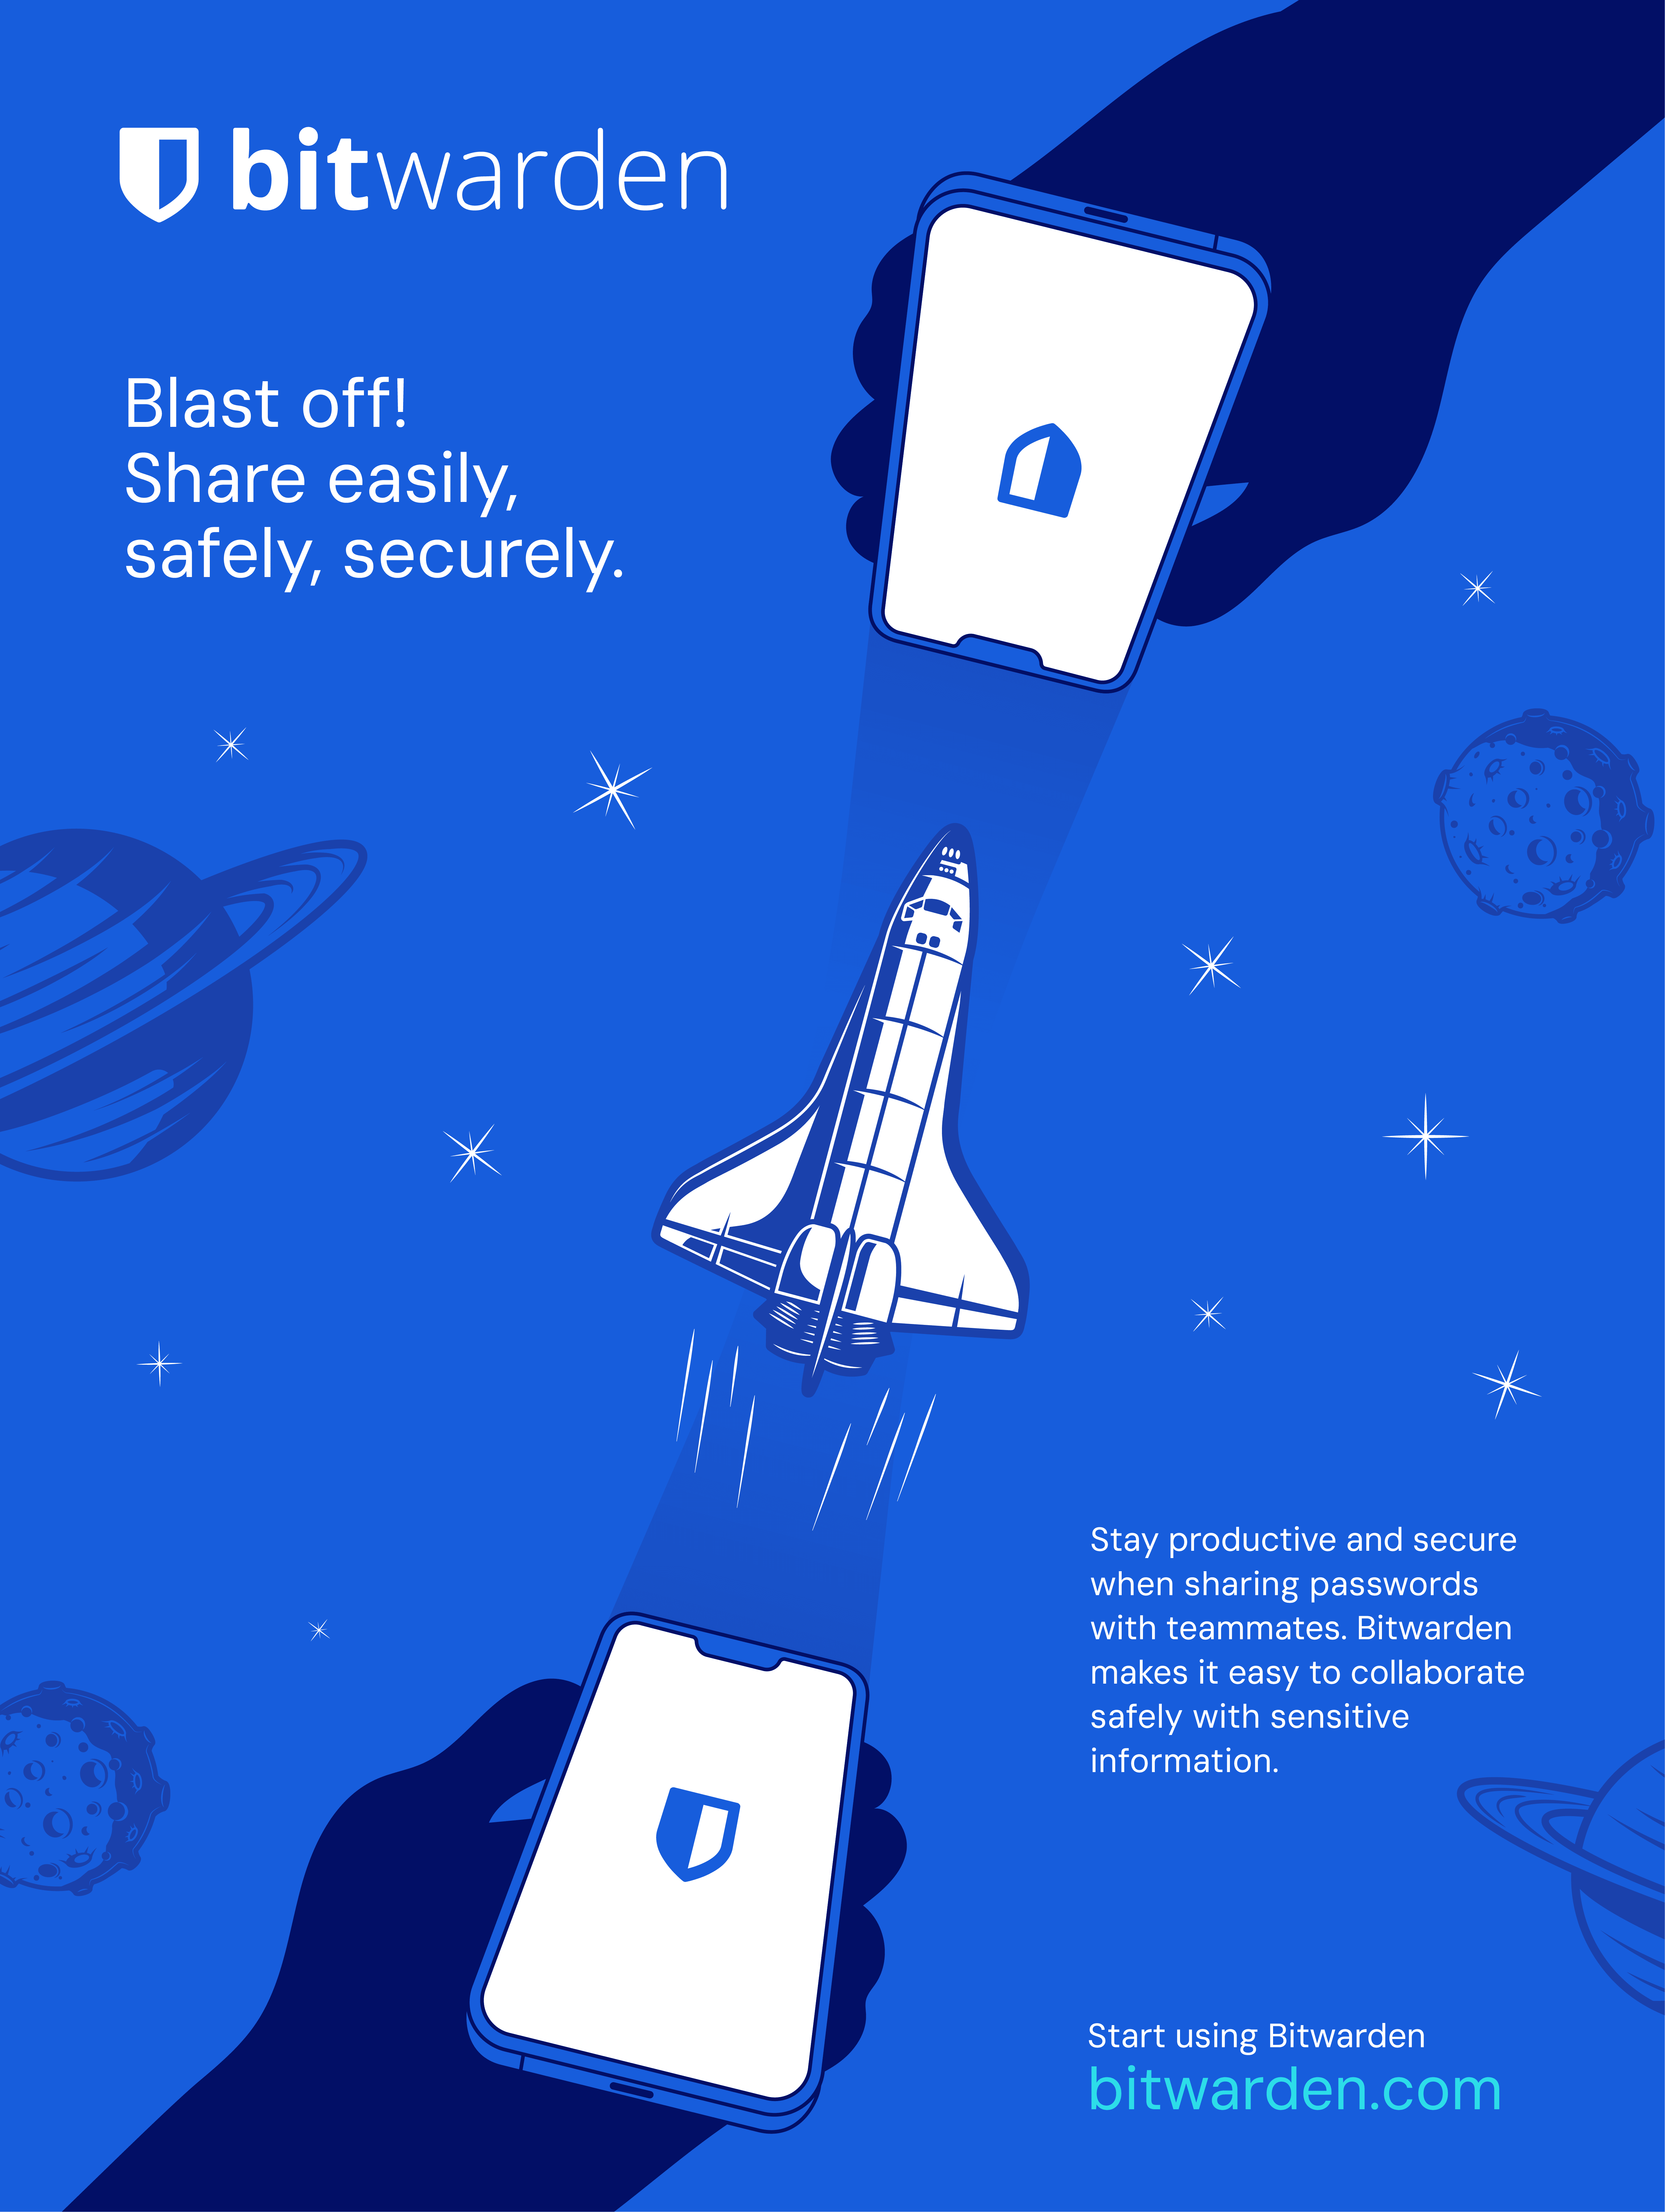 Blast off! Share easily, safely, securely.